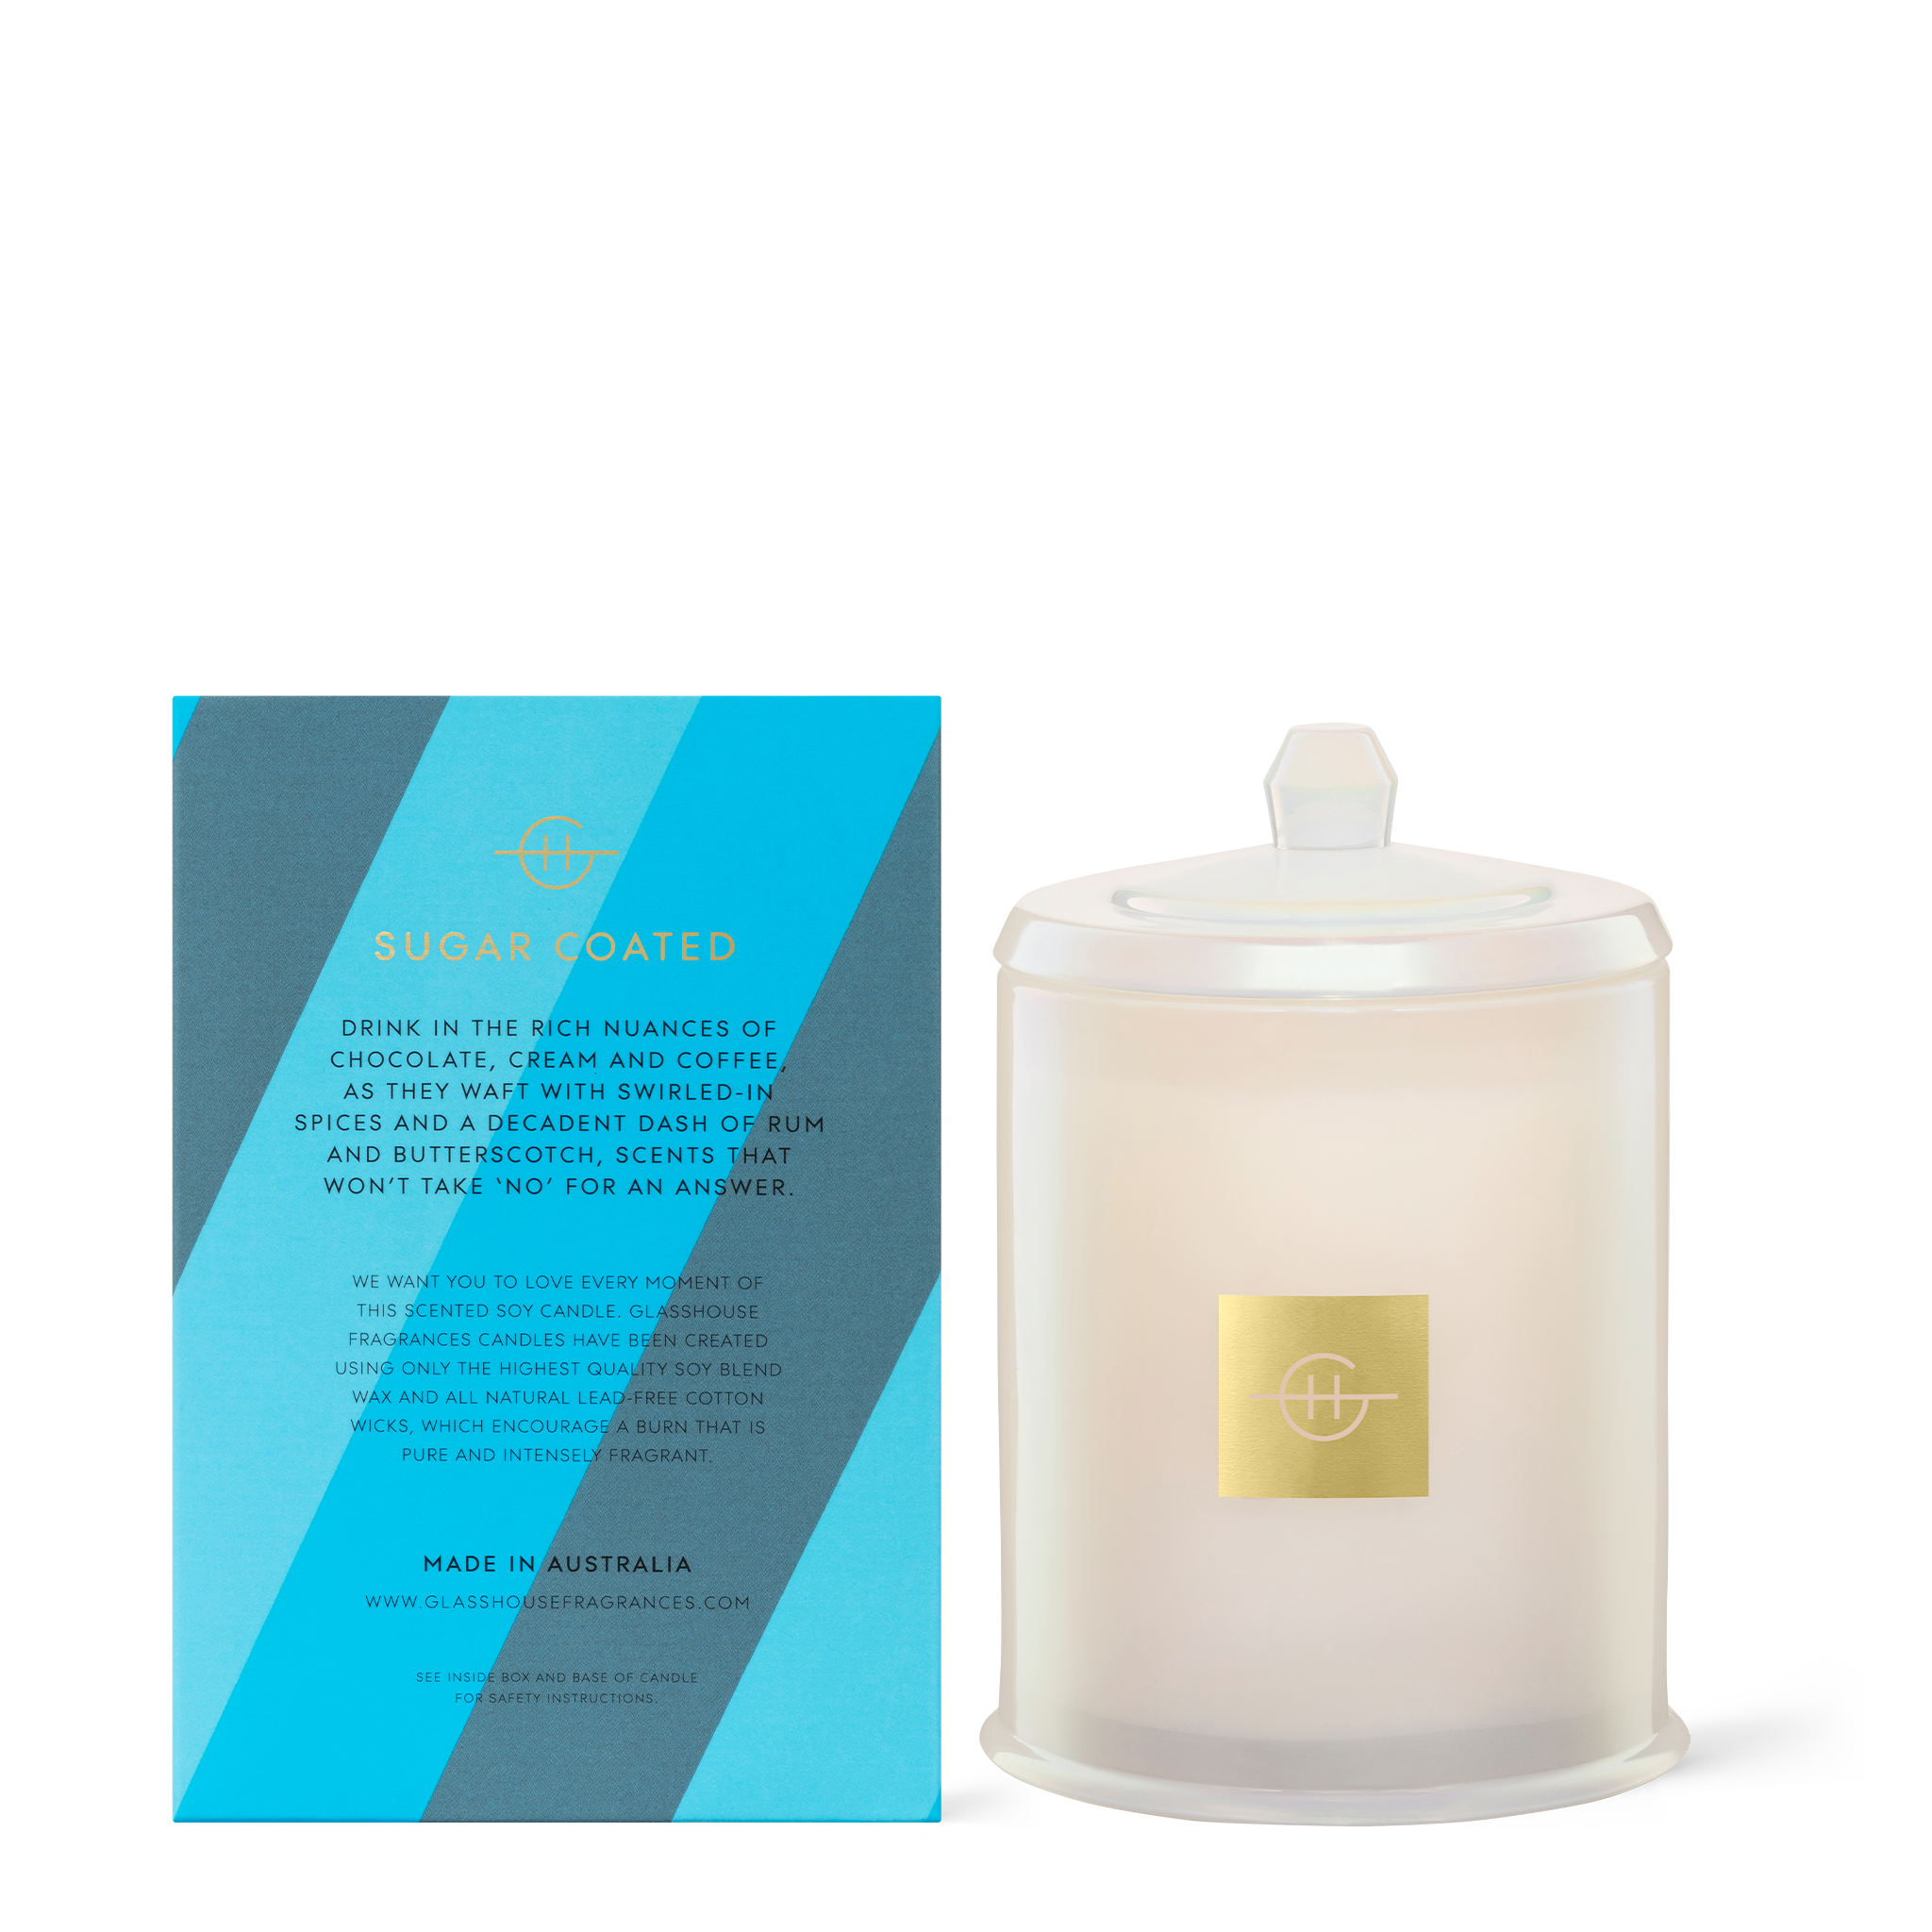 Glasshouse Fragrances Rich & Famous Iced Mocha 380g Soy Candle with box - back of product shot